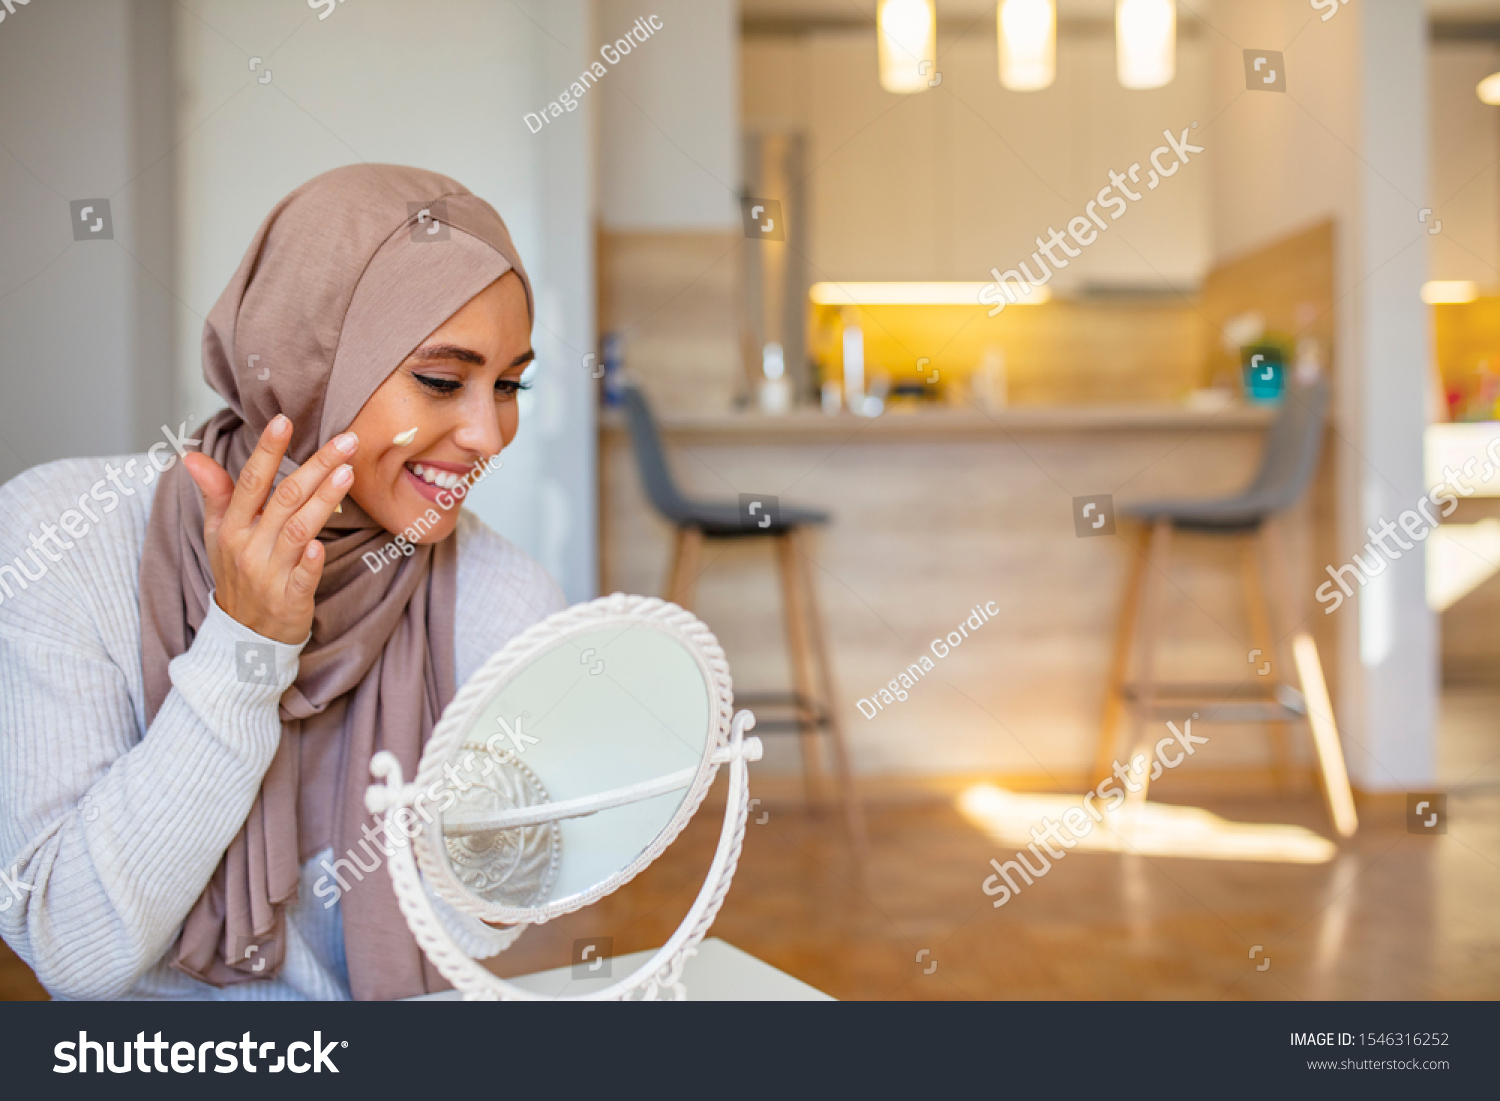 Muslim woman spreading cream over her face while looking in the mirror. Beauty treatment. Female putting on moisturizer on her facial. Smiling Muslim woman applying cream to face and looking to mirror #1546316252